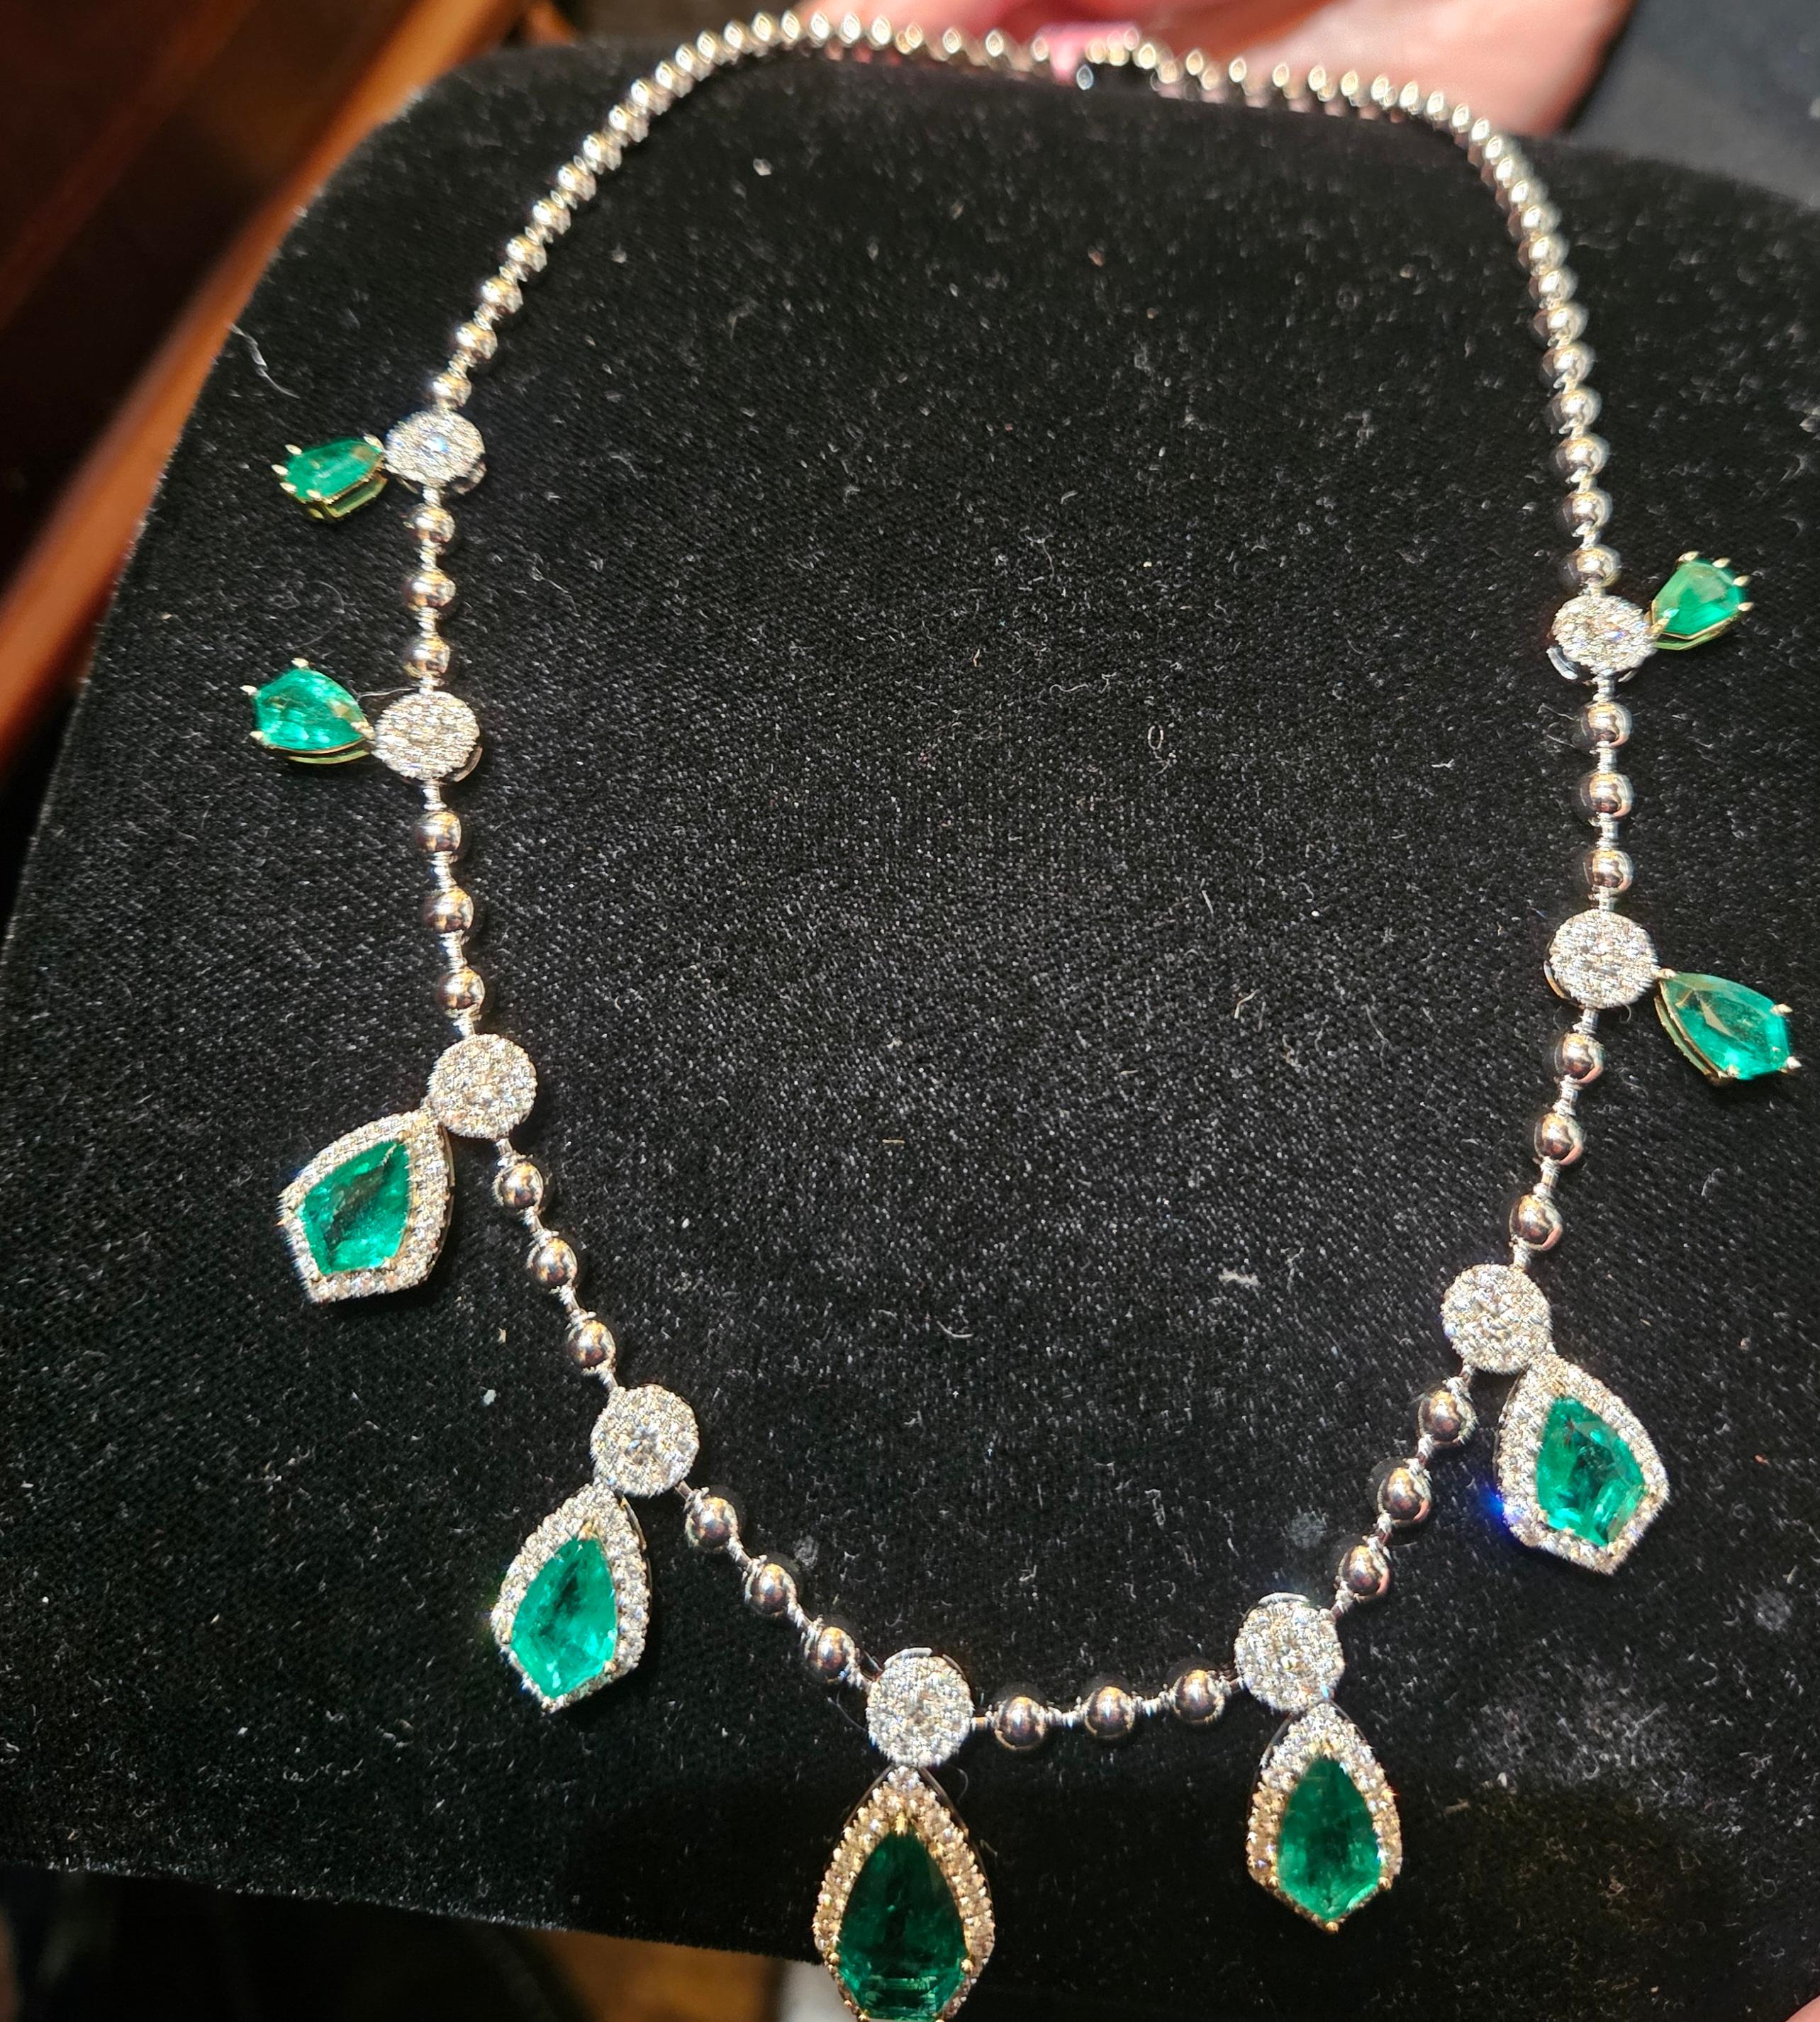 A Rare 18KT White Gold Emerald Diamond Necklace. Necklace is comprised of Finely Set Glittering Gorgeous Diamond Shaped Emeralds adorned with Sparkling Diamonds!!! The Emeralds and Diamonds are of Exquisite and Fine Quality. T.C.W. approx